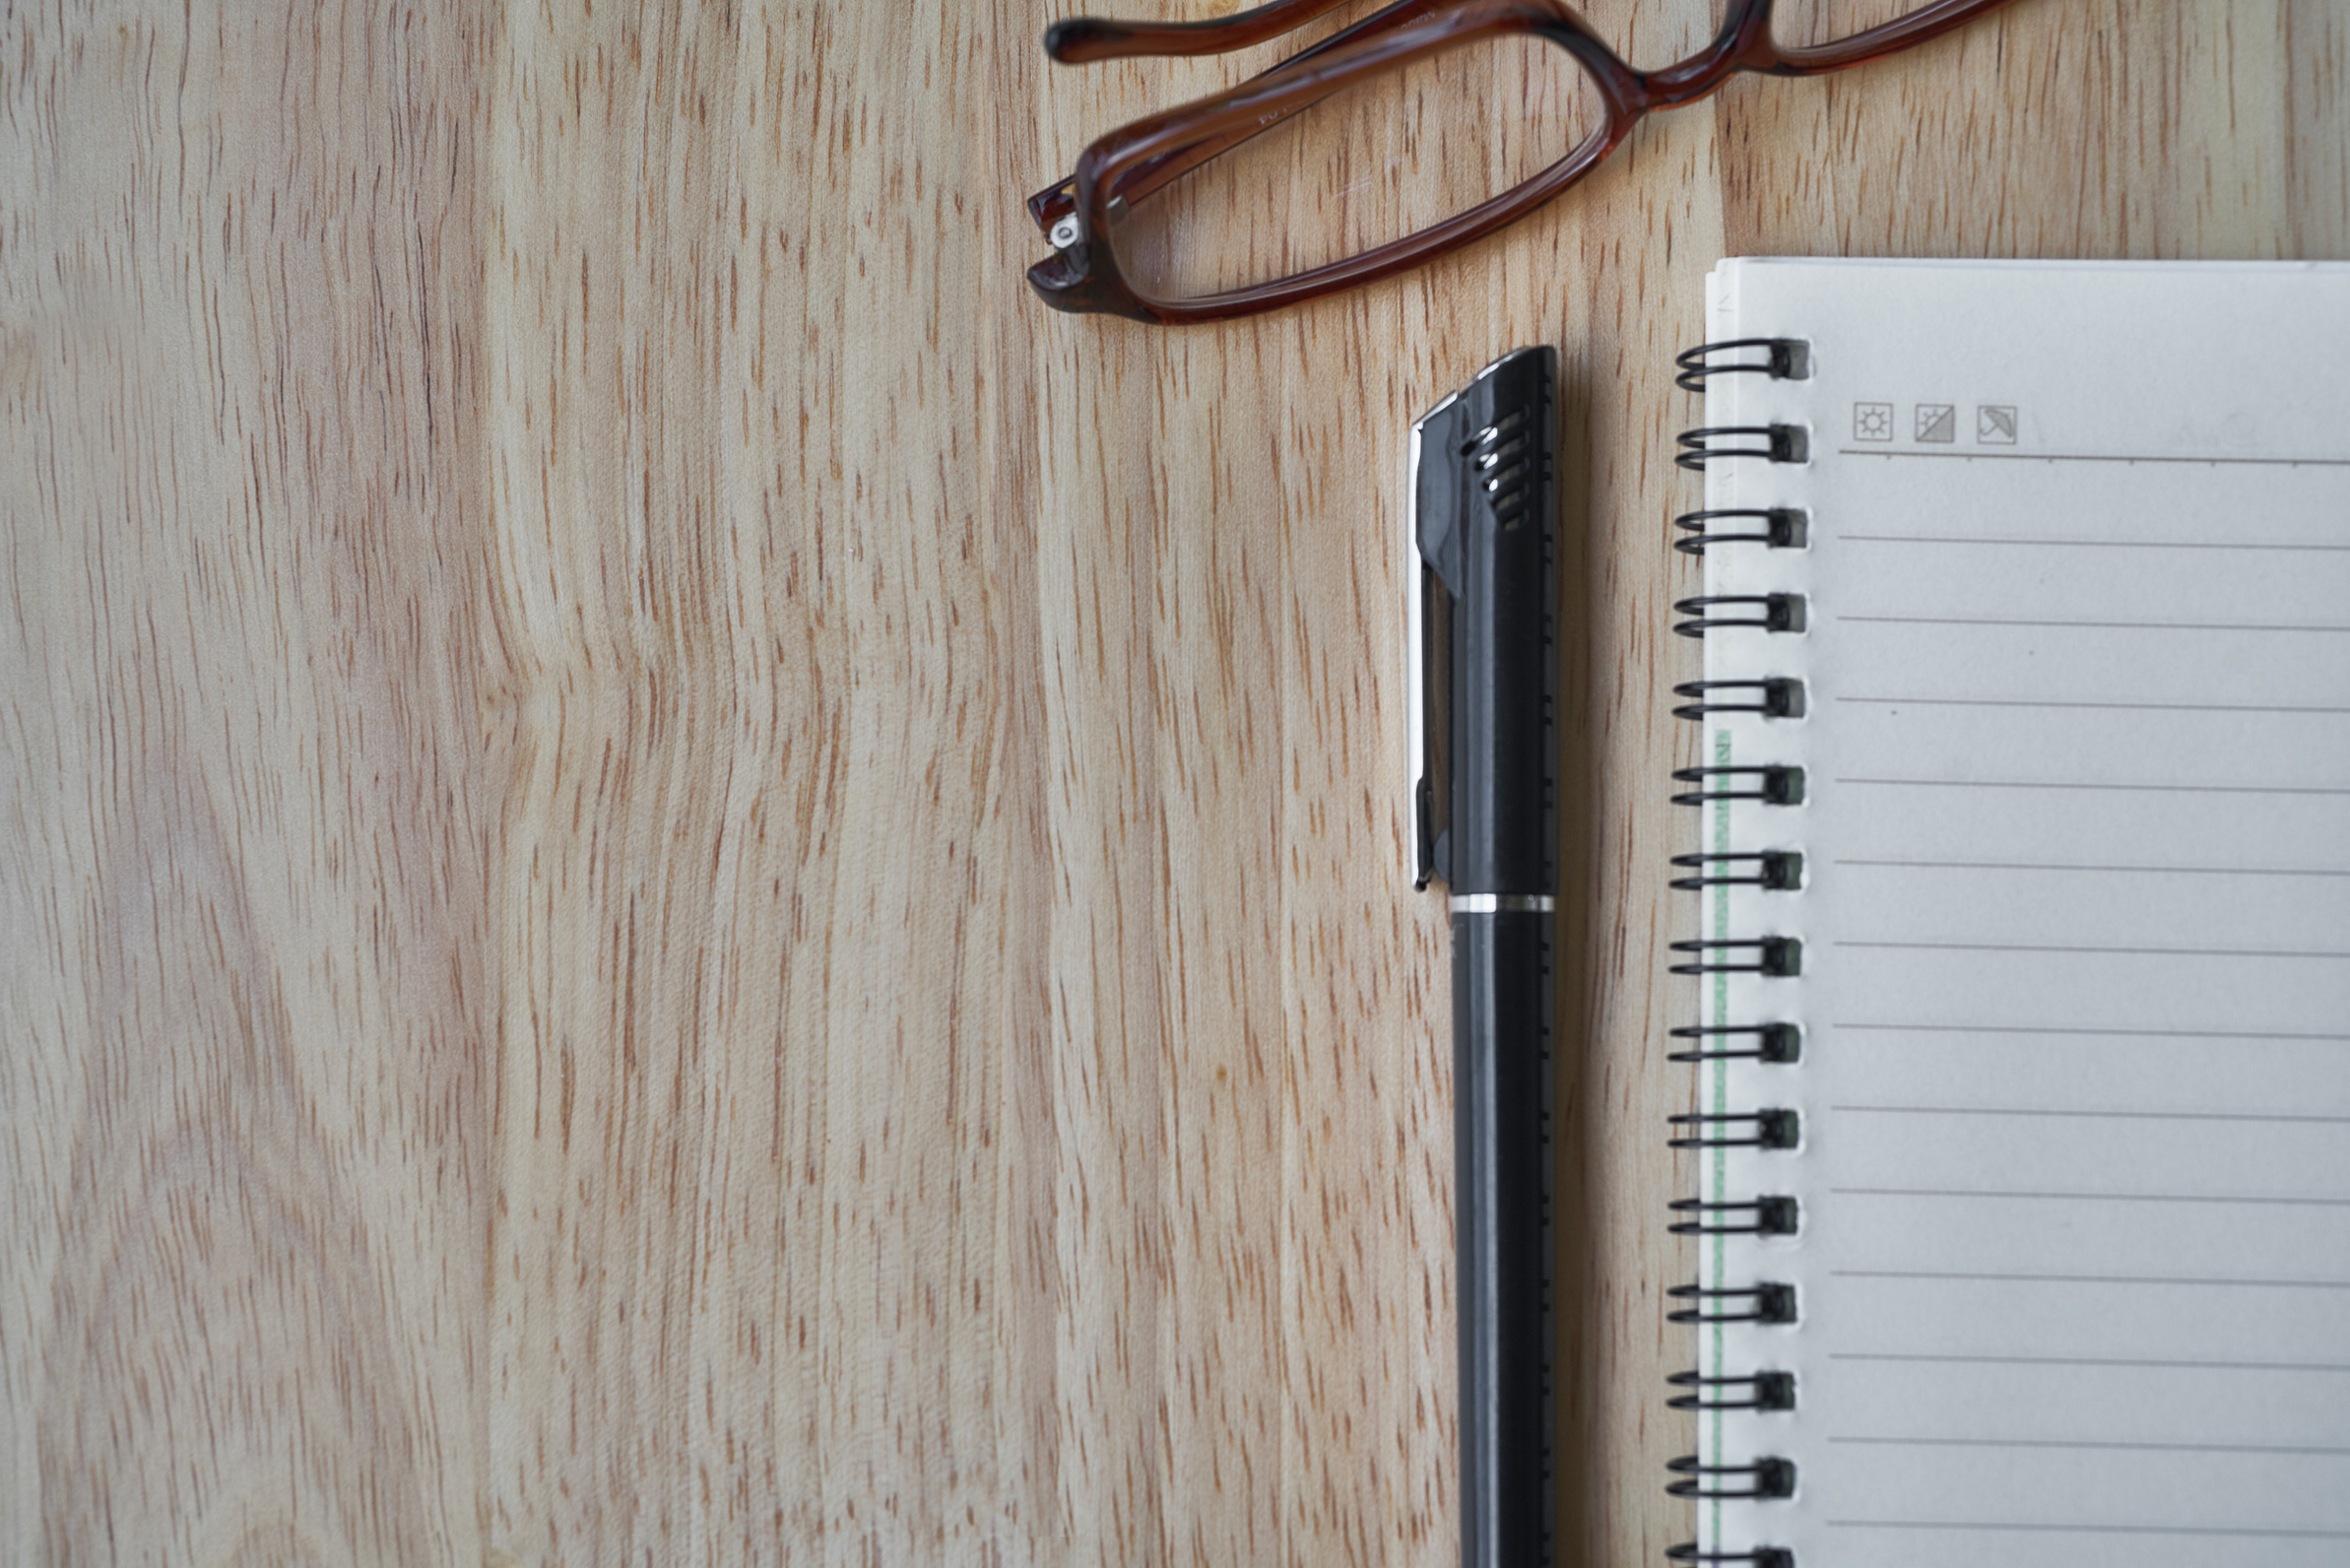 Notebook, Pen and Reading Glasses on Wooden Table